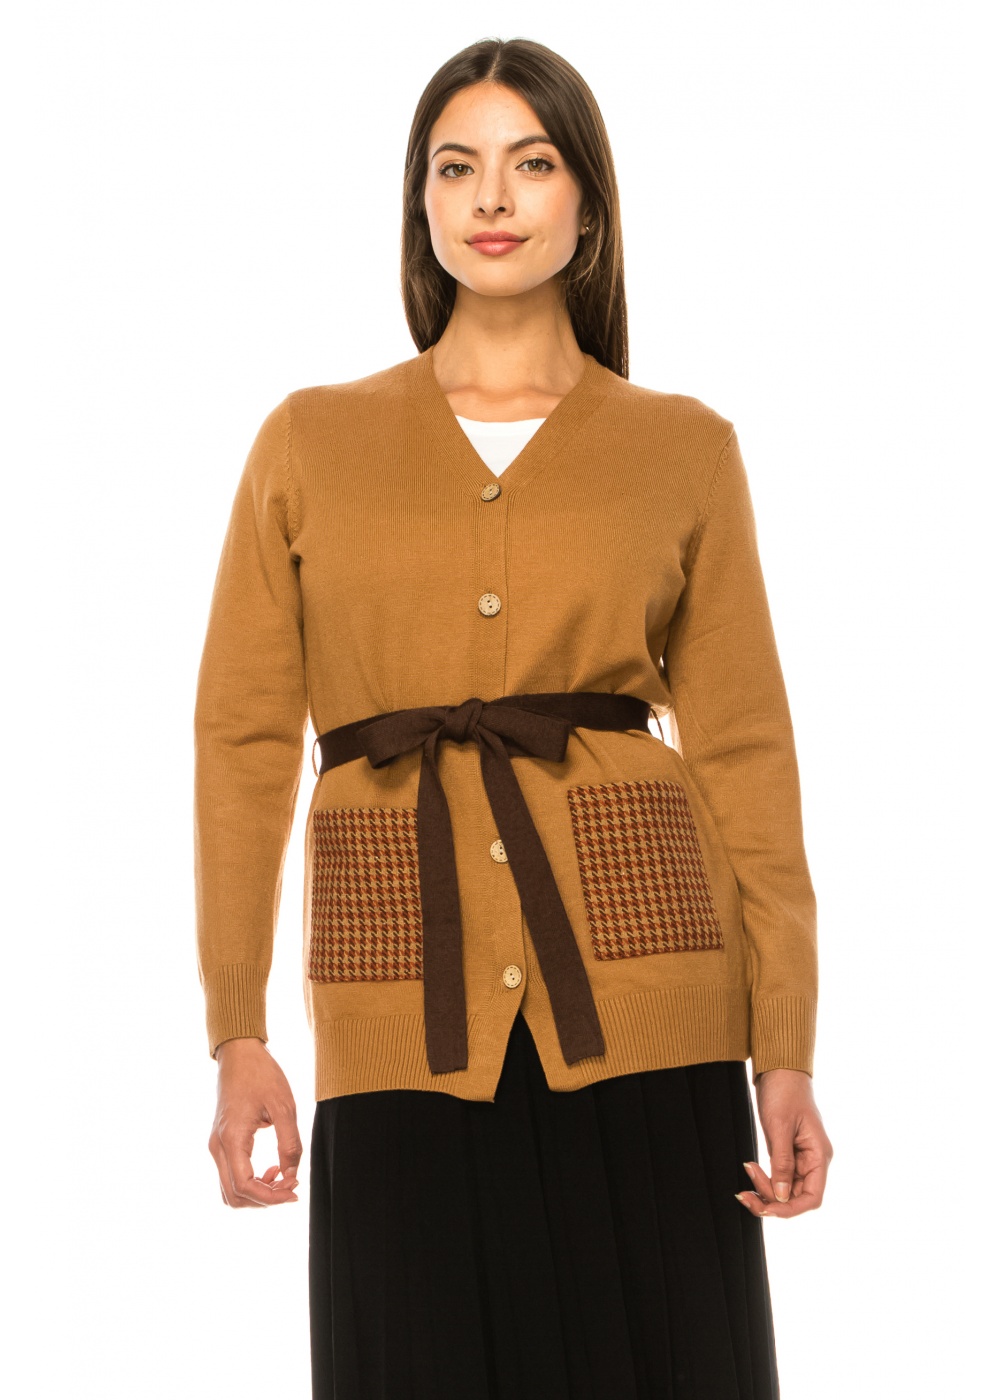 Cardigan with a belt in camel